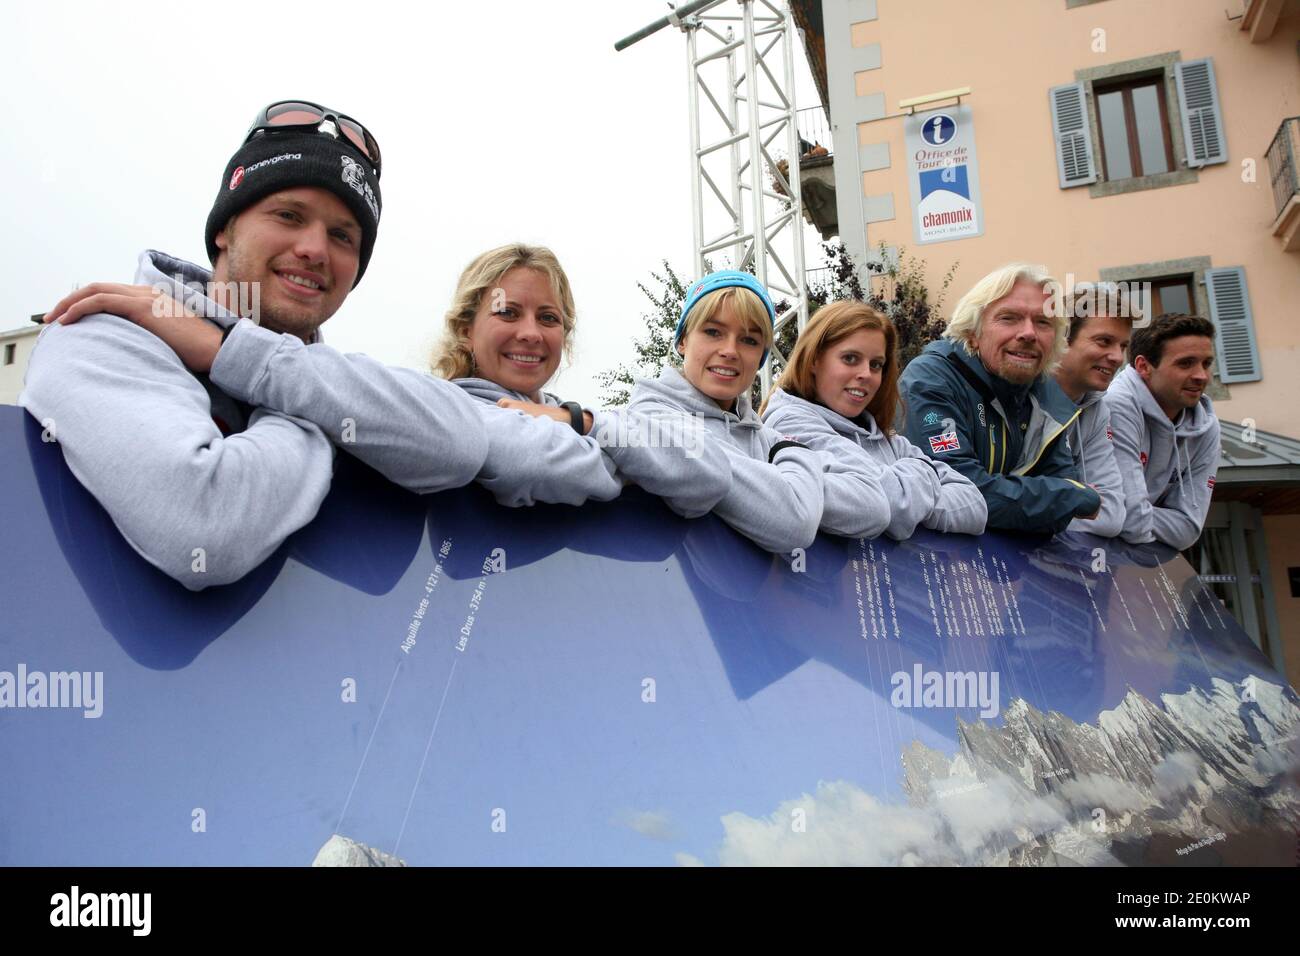 Virgin Group founder and CEO Sir Richard Branson (3rd R) poses alongside the team of The Big Change Charitable Trust, (L-R) Sam Branson, Holly Branson, Sam's fiancee Isabella Calthorpe, Princess Beatrice of York, Sam Richardson and Phil Nevin, in Chamonix, French Alps on September 3, 2012. Sir Richard joined the team in their attempt to climb Western Europe's highest mountain, Mont Blanc. Founded by Branson's children Holly and Sam along with their friends, the Trust works in partnership with charitable projects throughout the UK, assisting them in their mission to inspire and encourage young Stock Photo